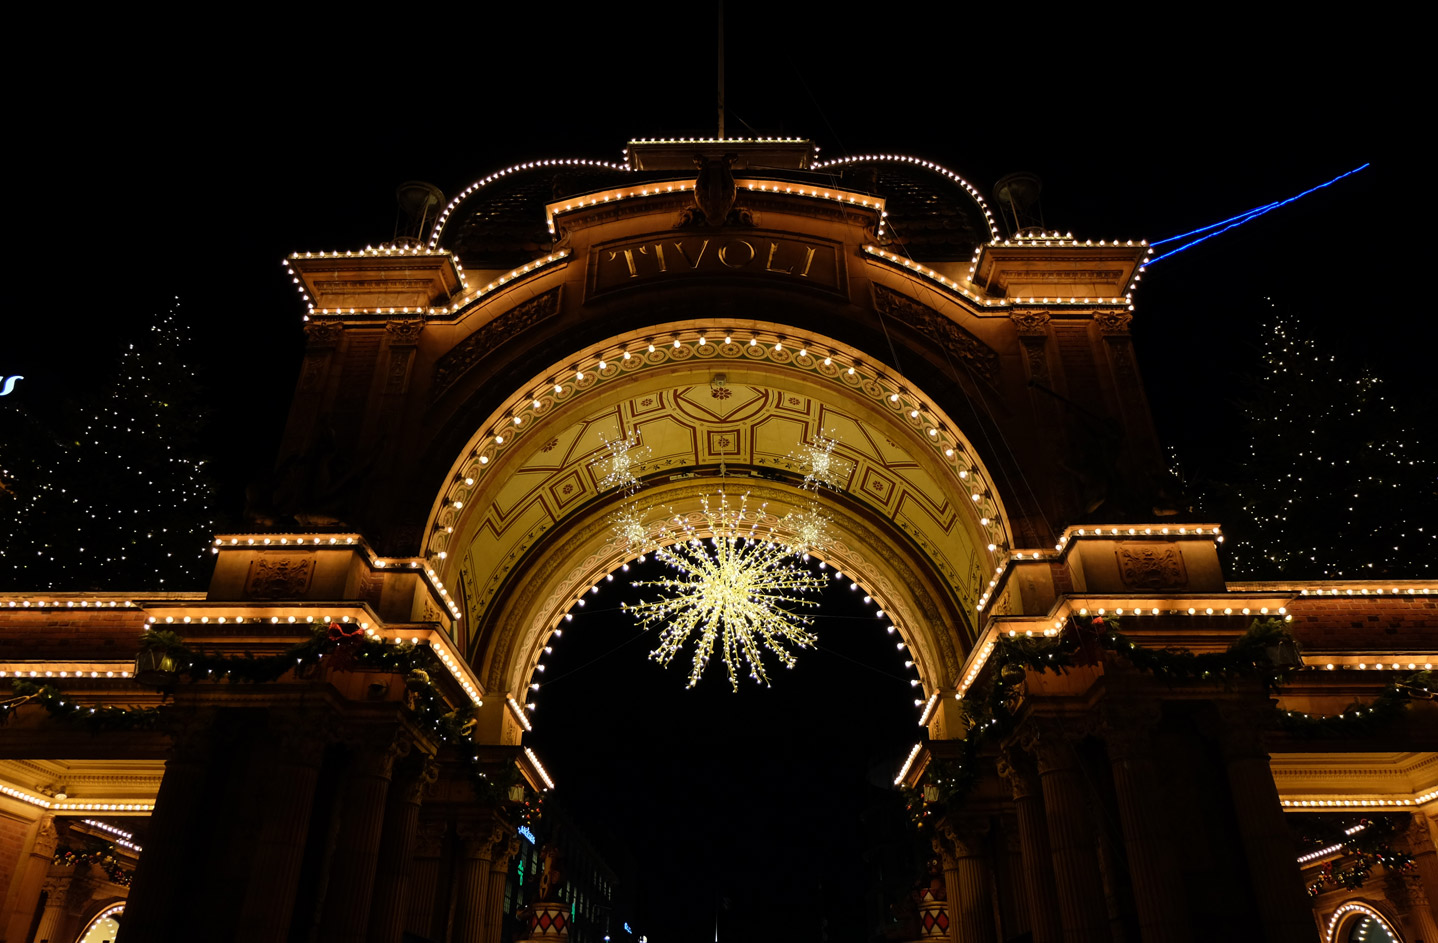 The entrance to Tivoli feels like the door to Narnia at Christmas time